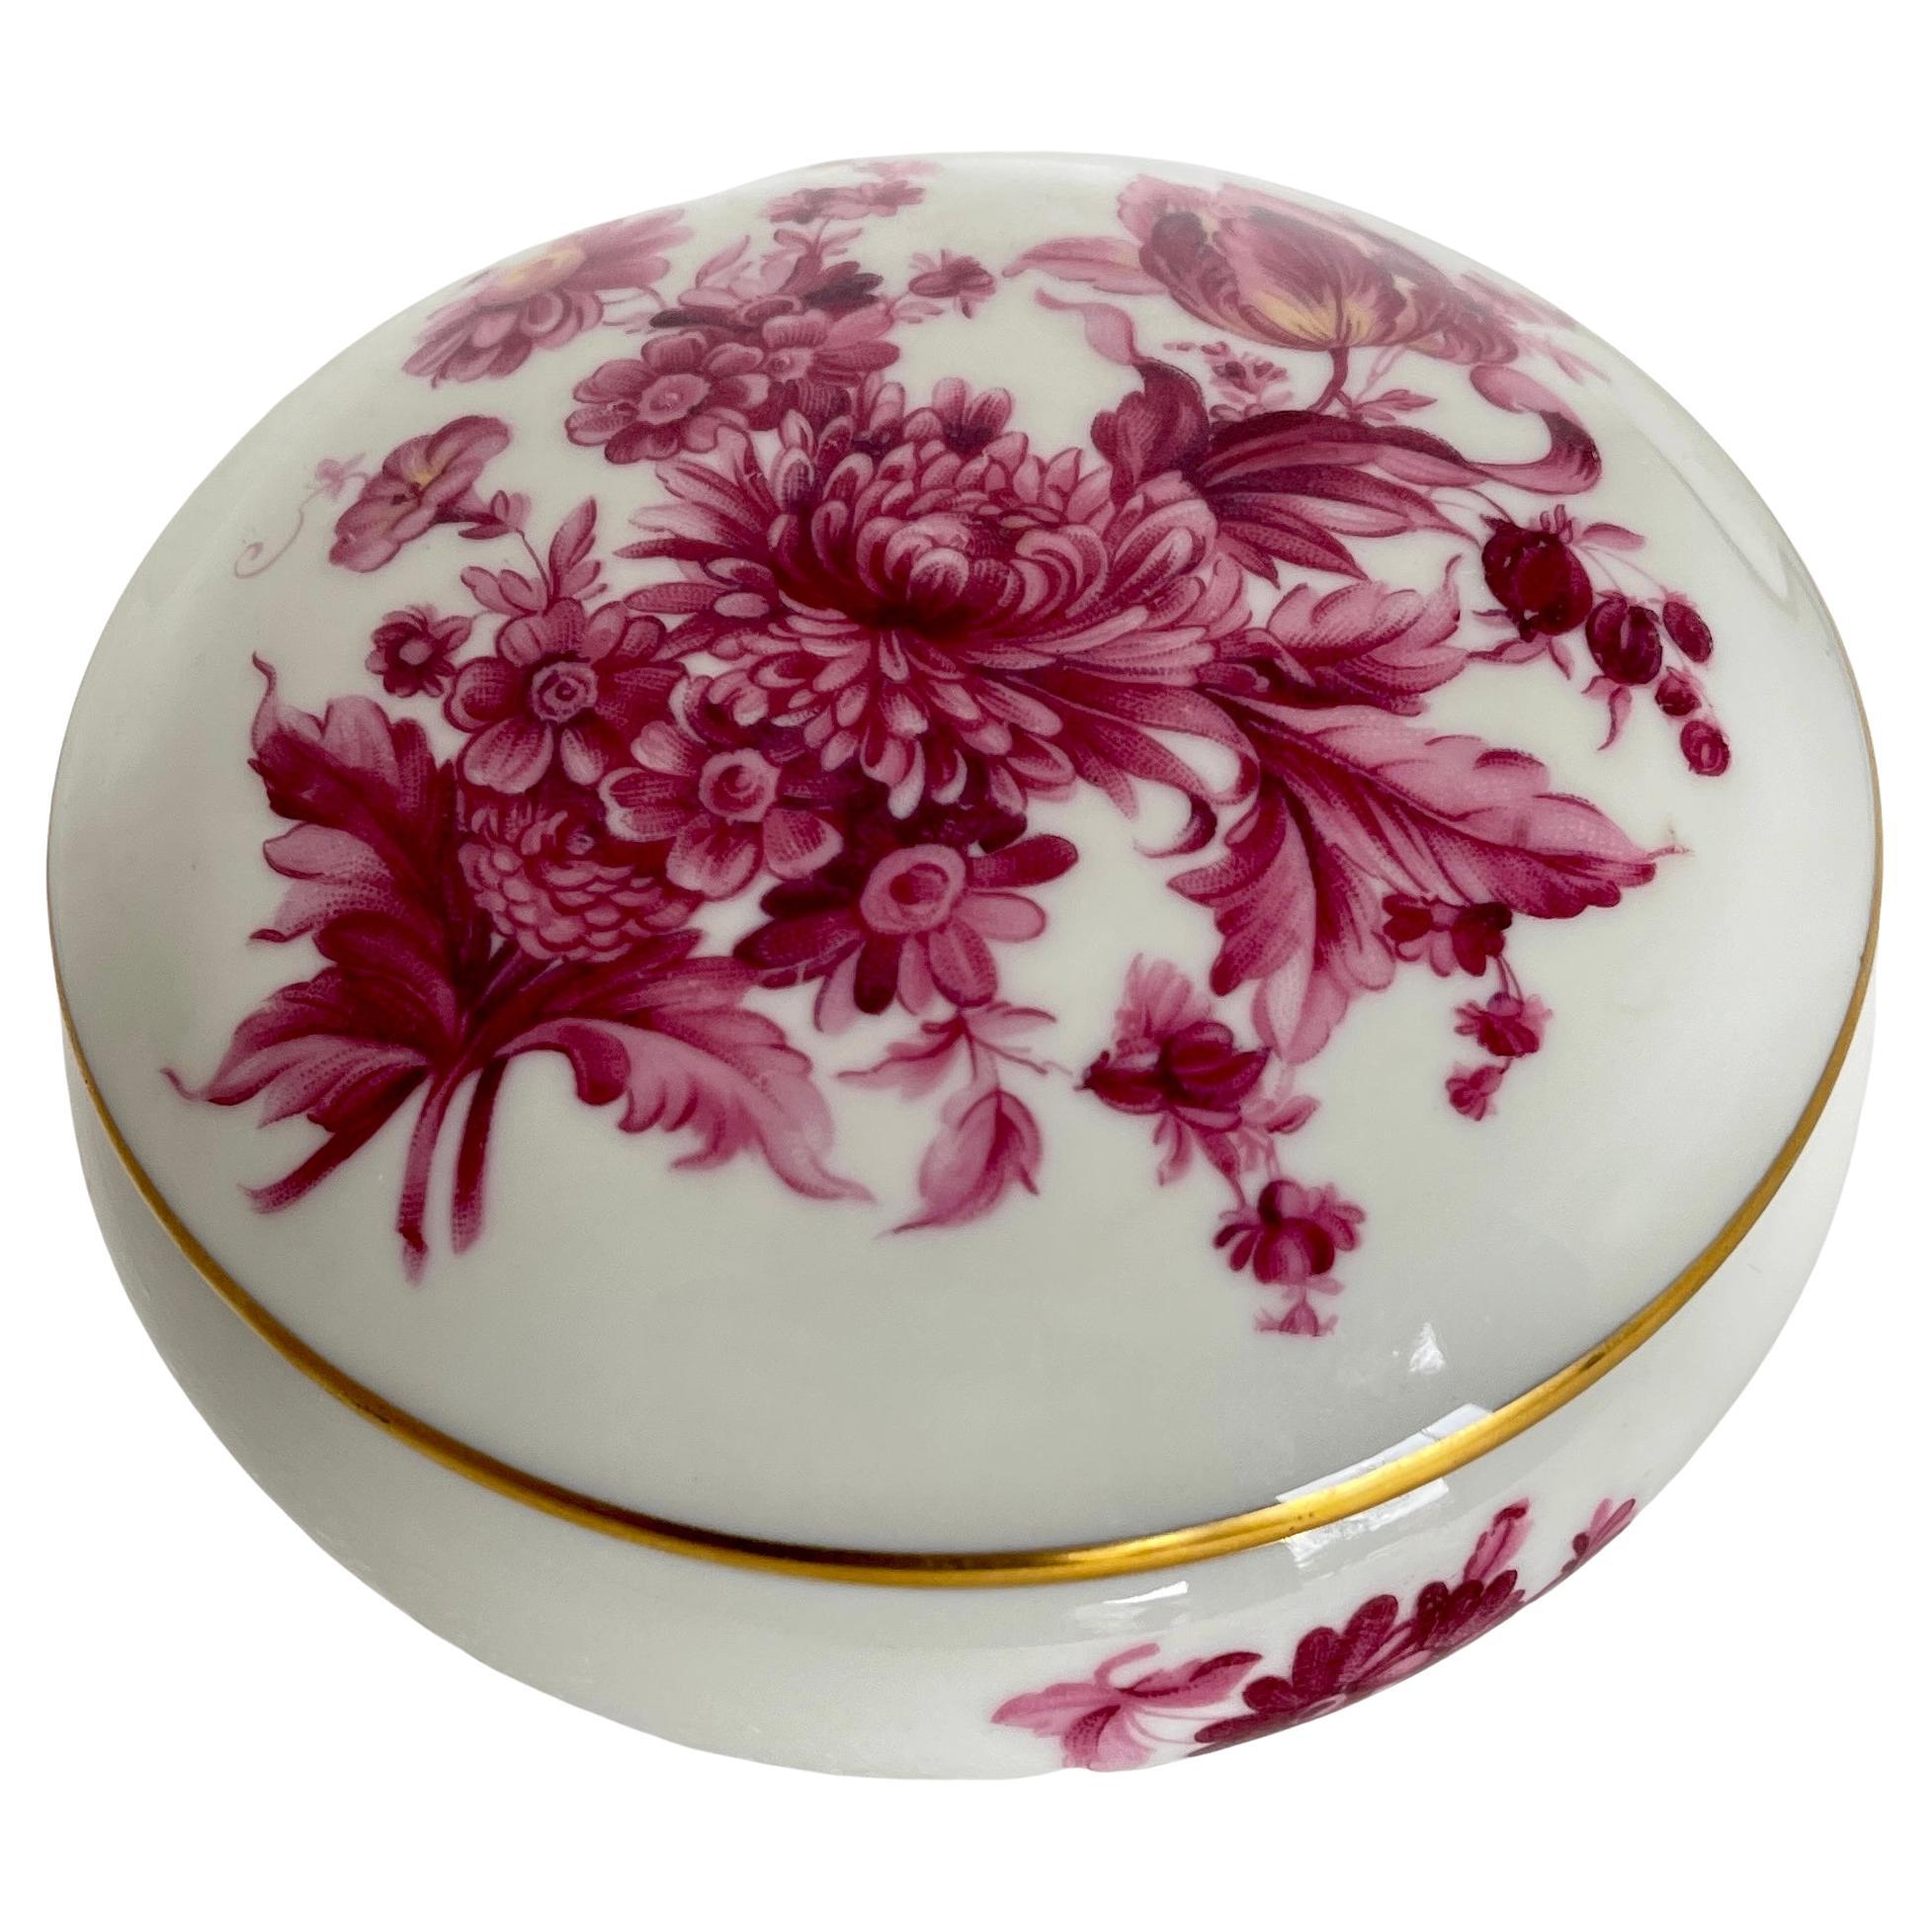 Vintage German porcelain vanity box. This petite round box has gorgeous hand painted detail throughout lid and body of box. The floral design is in striking magenta colors with gold banding between the lid and body of the trinket box. The interior